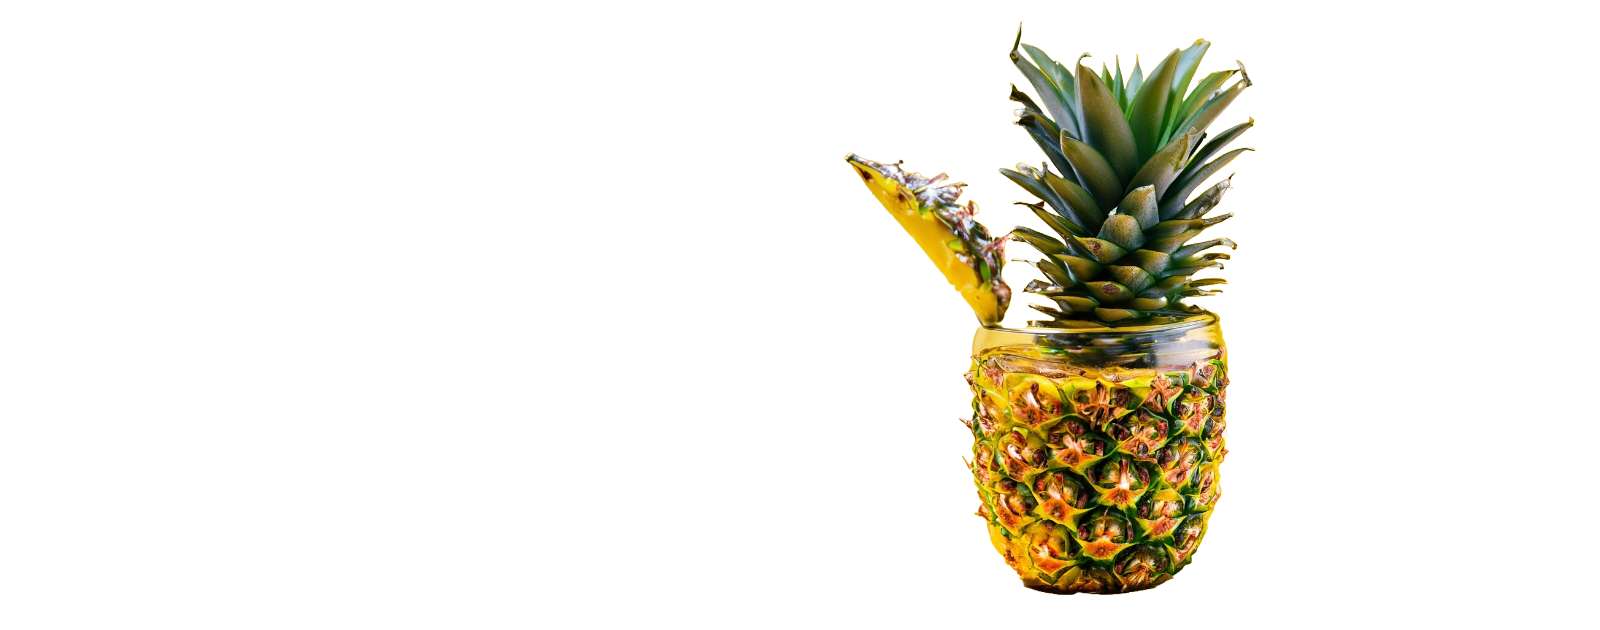 Is Your Pineapple Turning Brown Inside and Out? How to Determine its Freshness and Safety